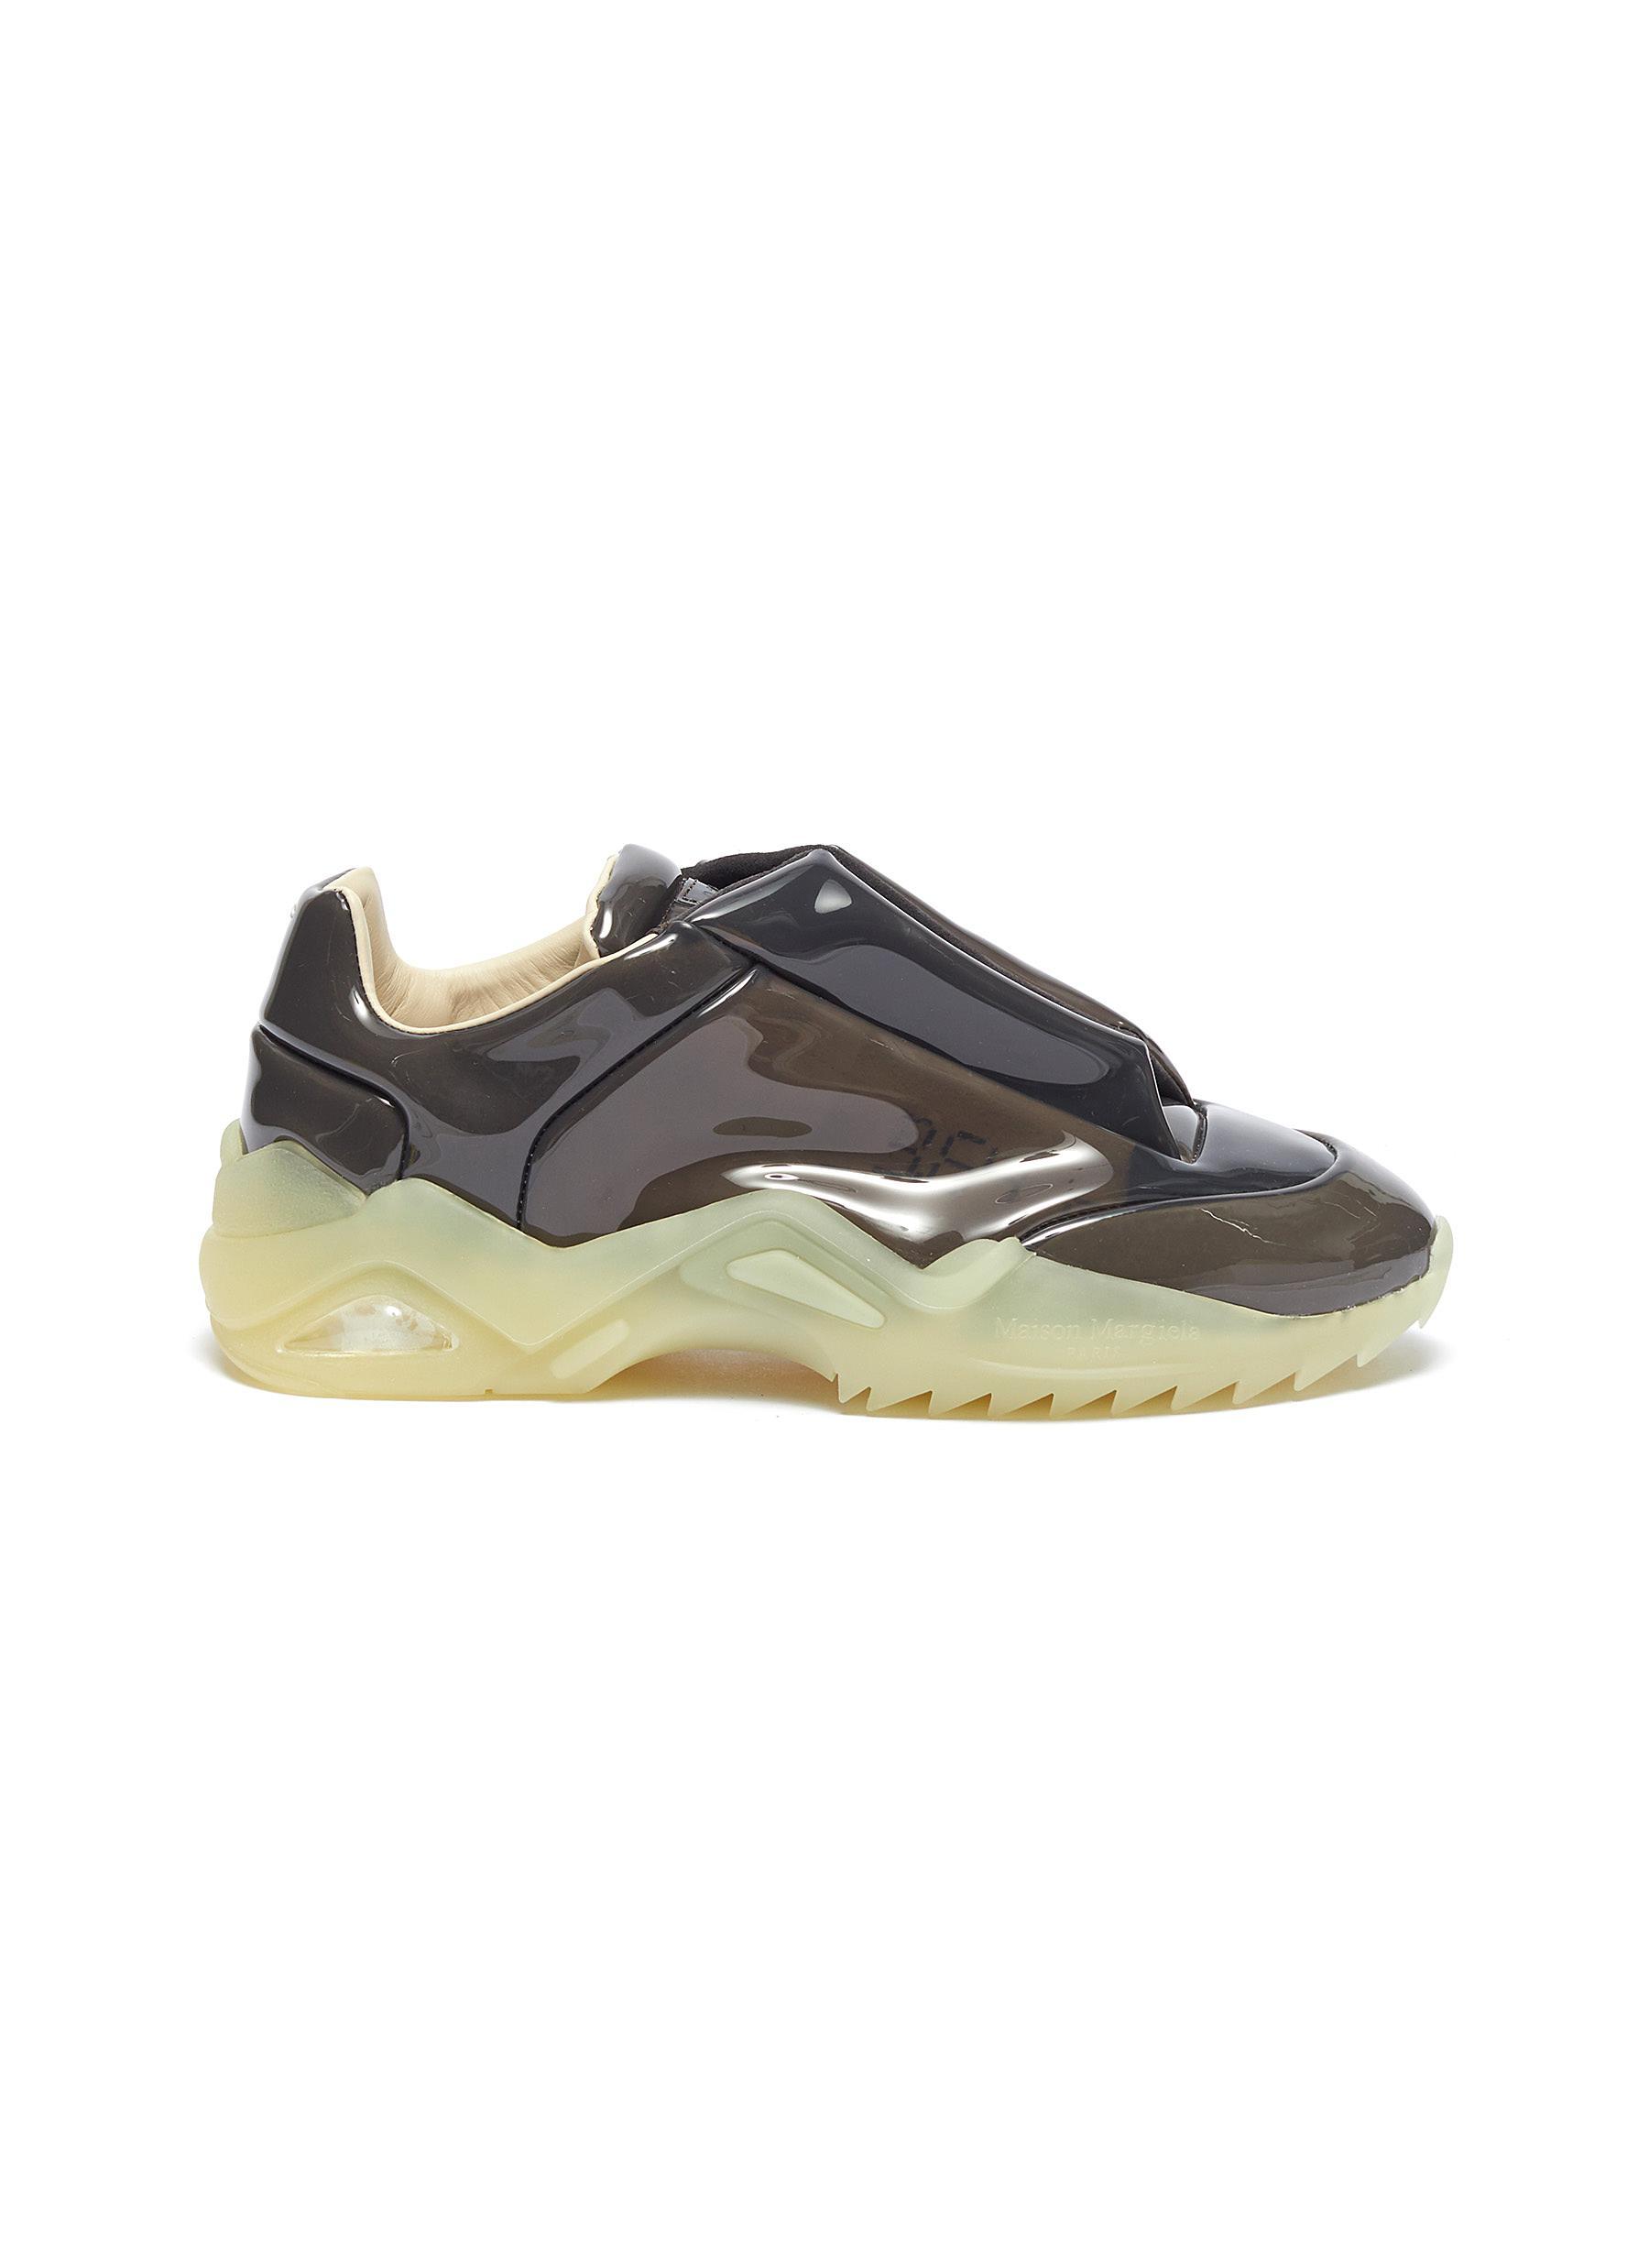 Maison Margiela 'new Future' Chunky Outsole Laminated Leather Sneakers in  Brown for Men | Lyst